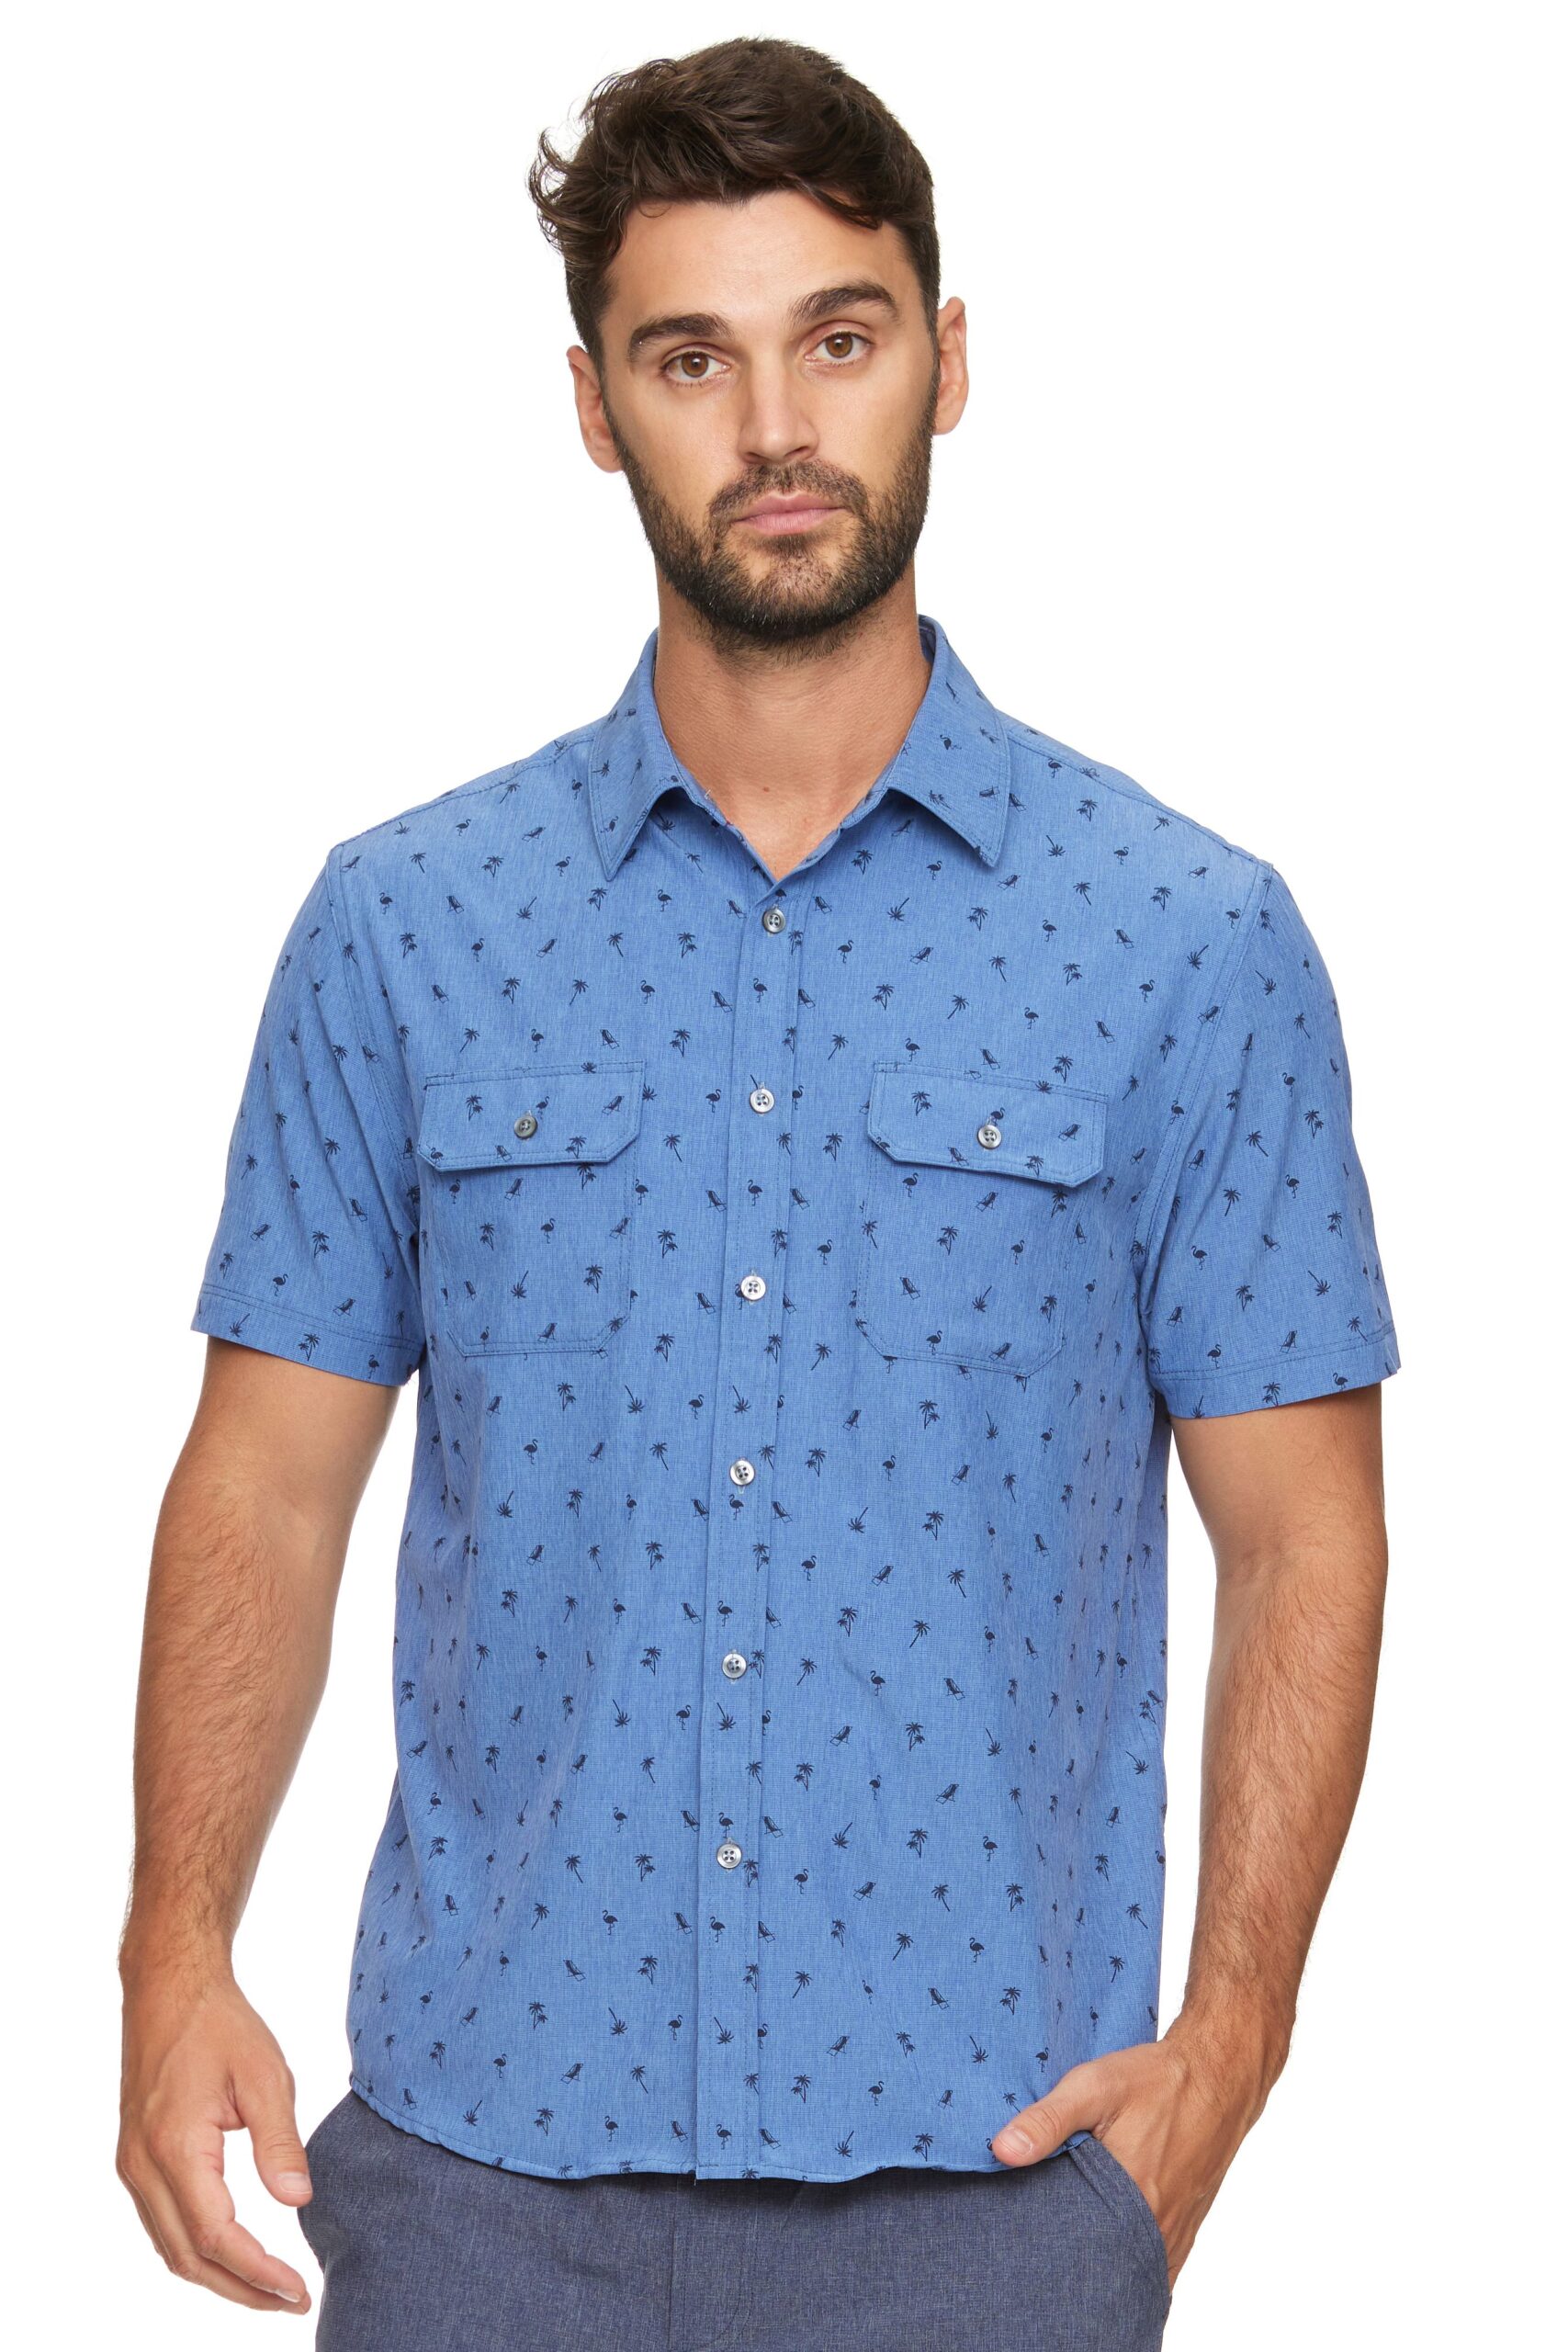 Tuscaloosa Short Sleeve Flamingo Button Up - Frontier Justice